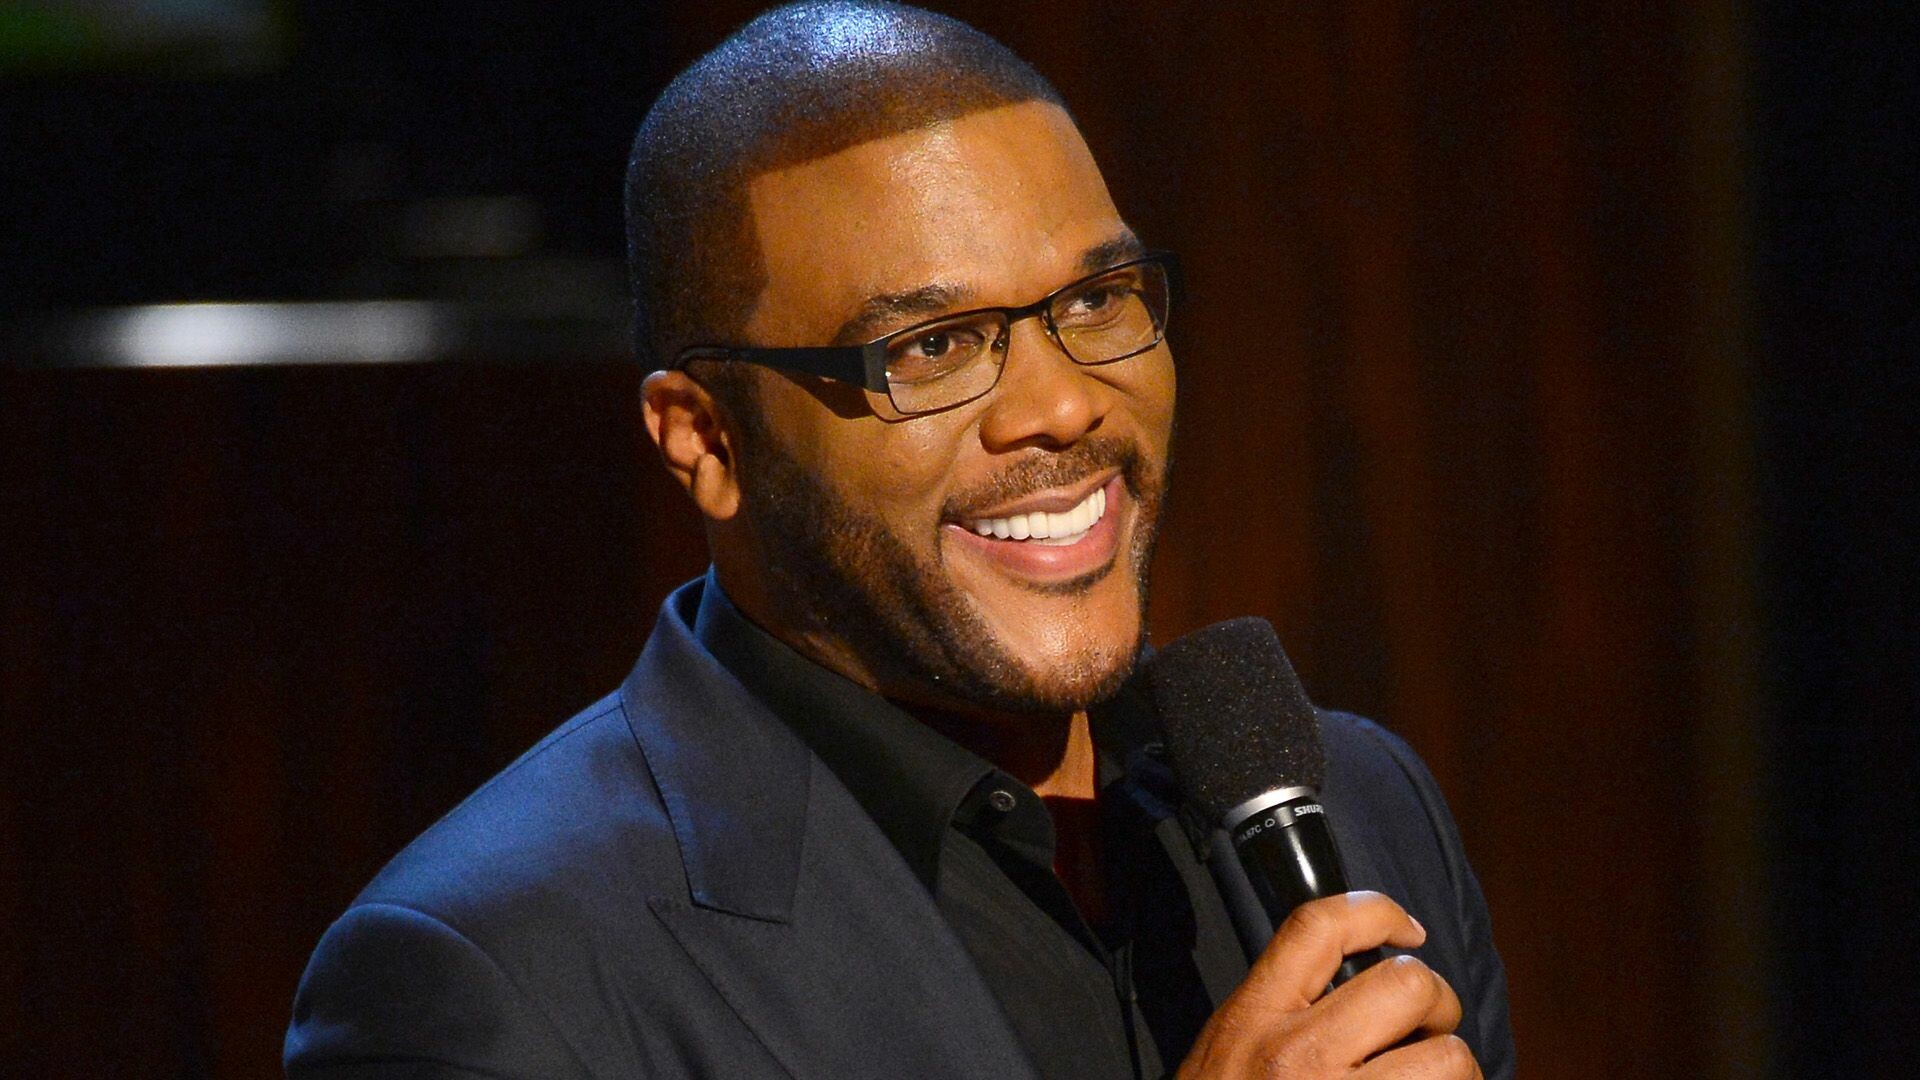 Tyler Perry, Unbreakable human qualities, Success through perseverance, Tyler Perry movies, 1920x1080 Full HD Desktop